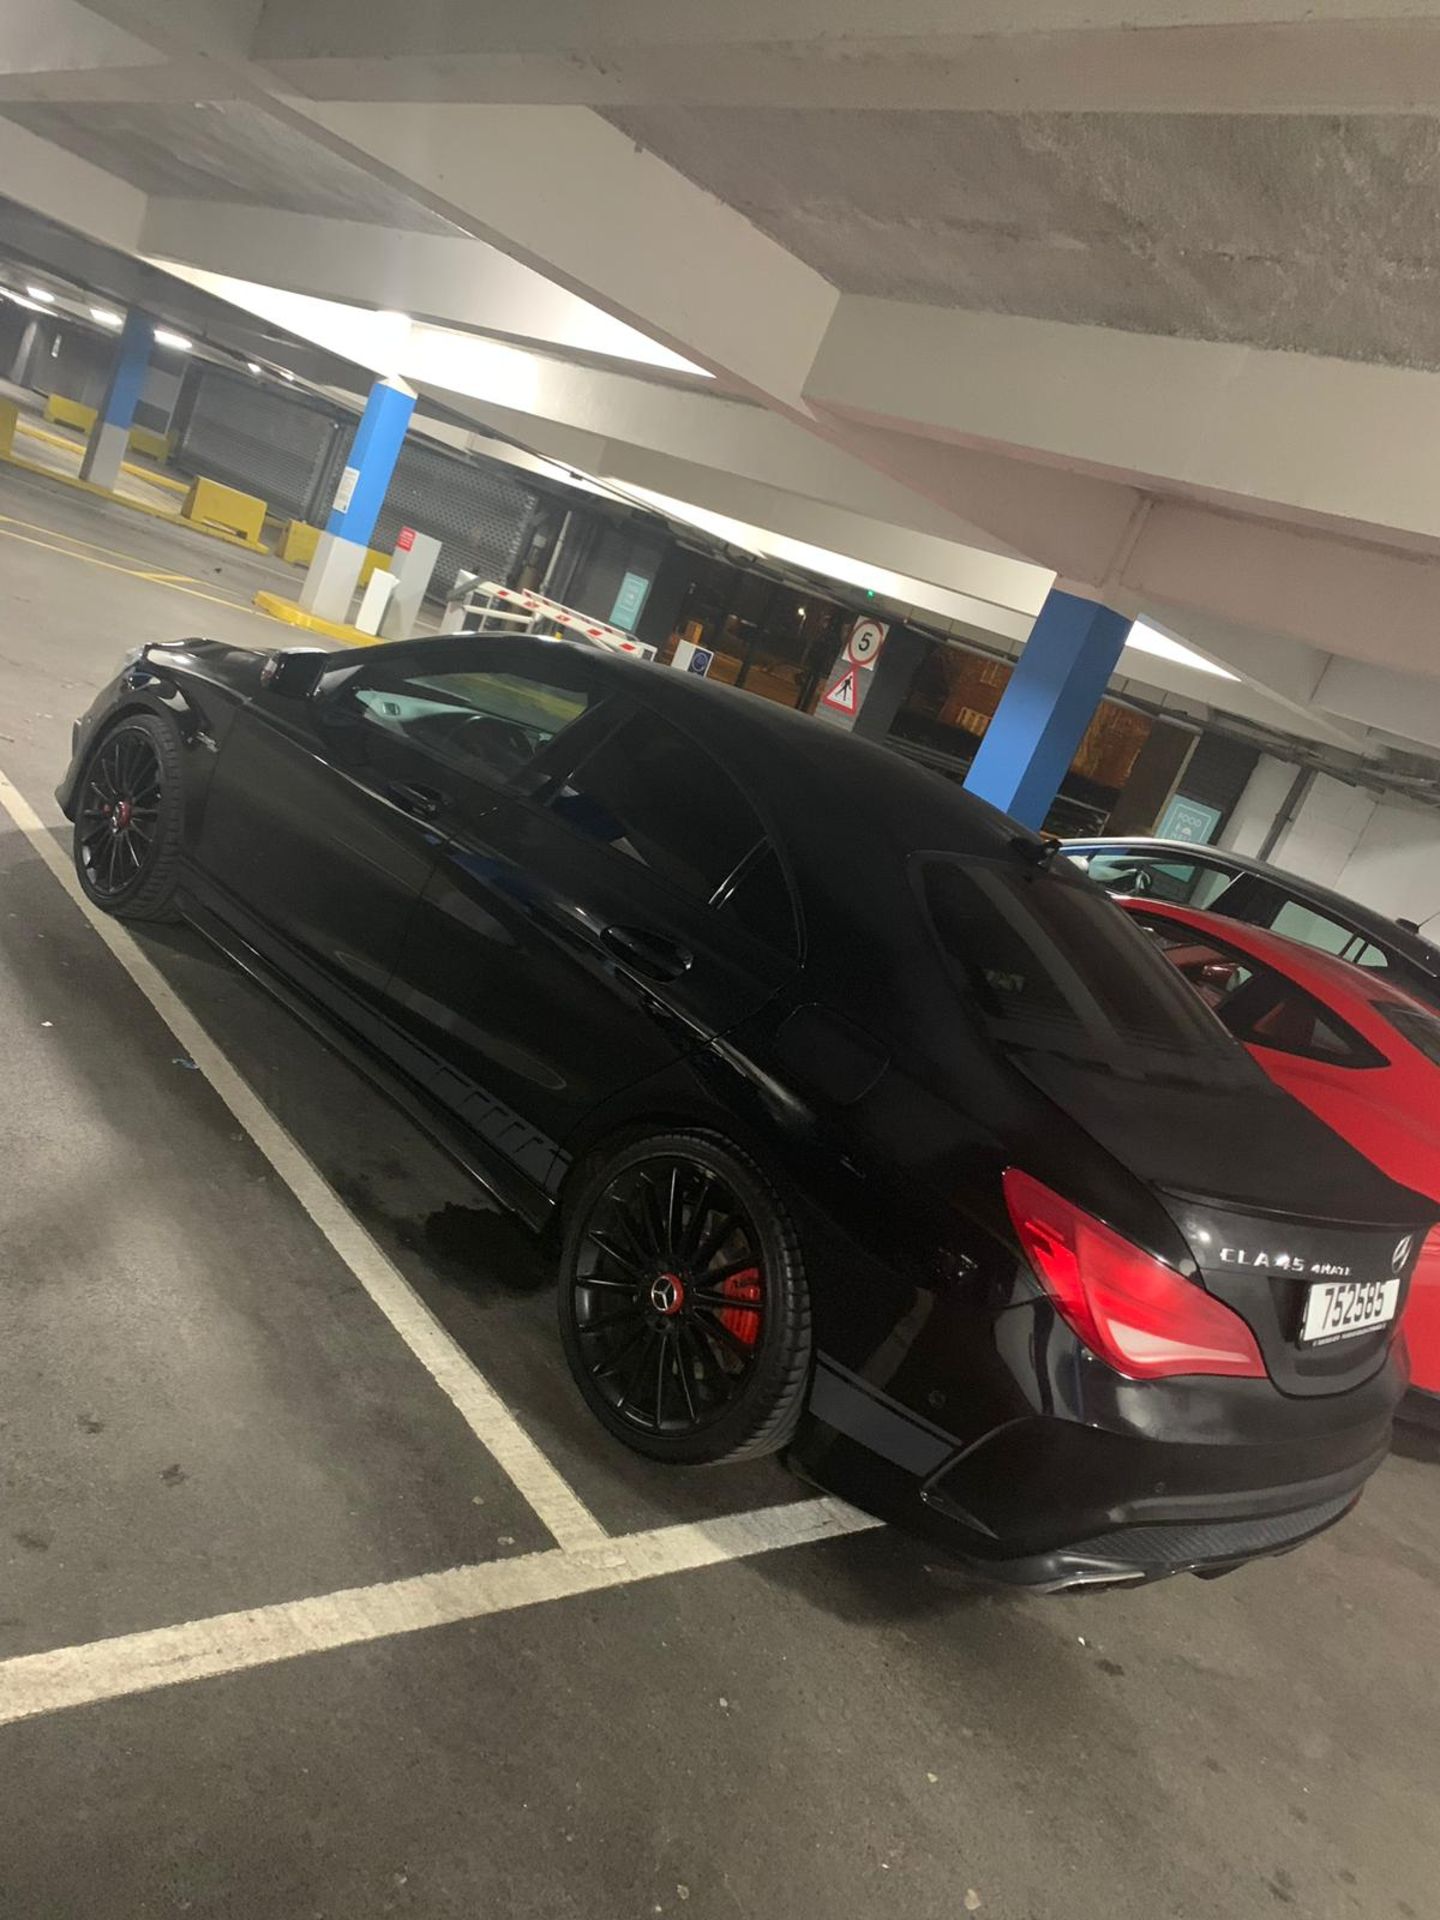 RARE 2015 MERCEDES-BENZ CLA45 AMG 4 MATIC SPECIAL EDITION 1, 355 BHP, 40,000KM / 25,000 MILES - Image 5 of 15